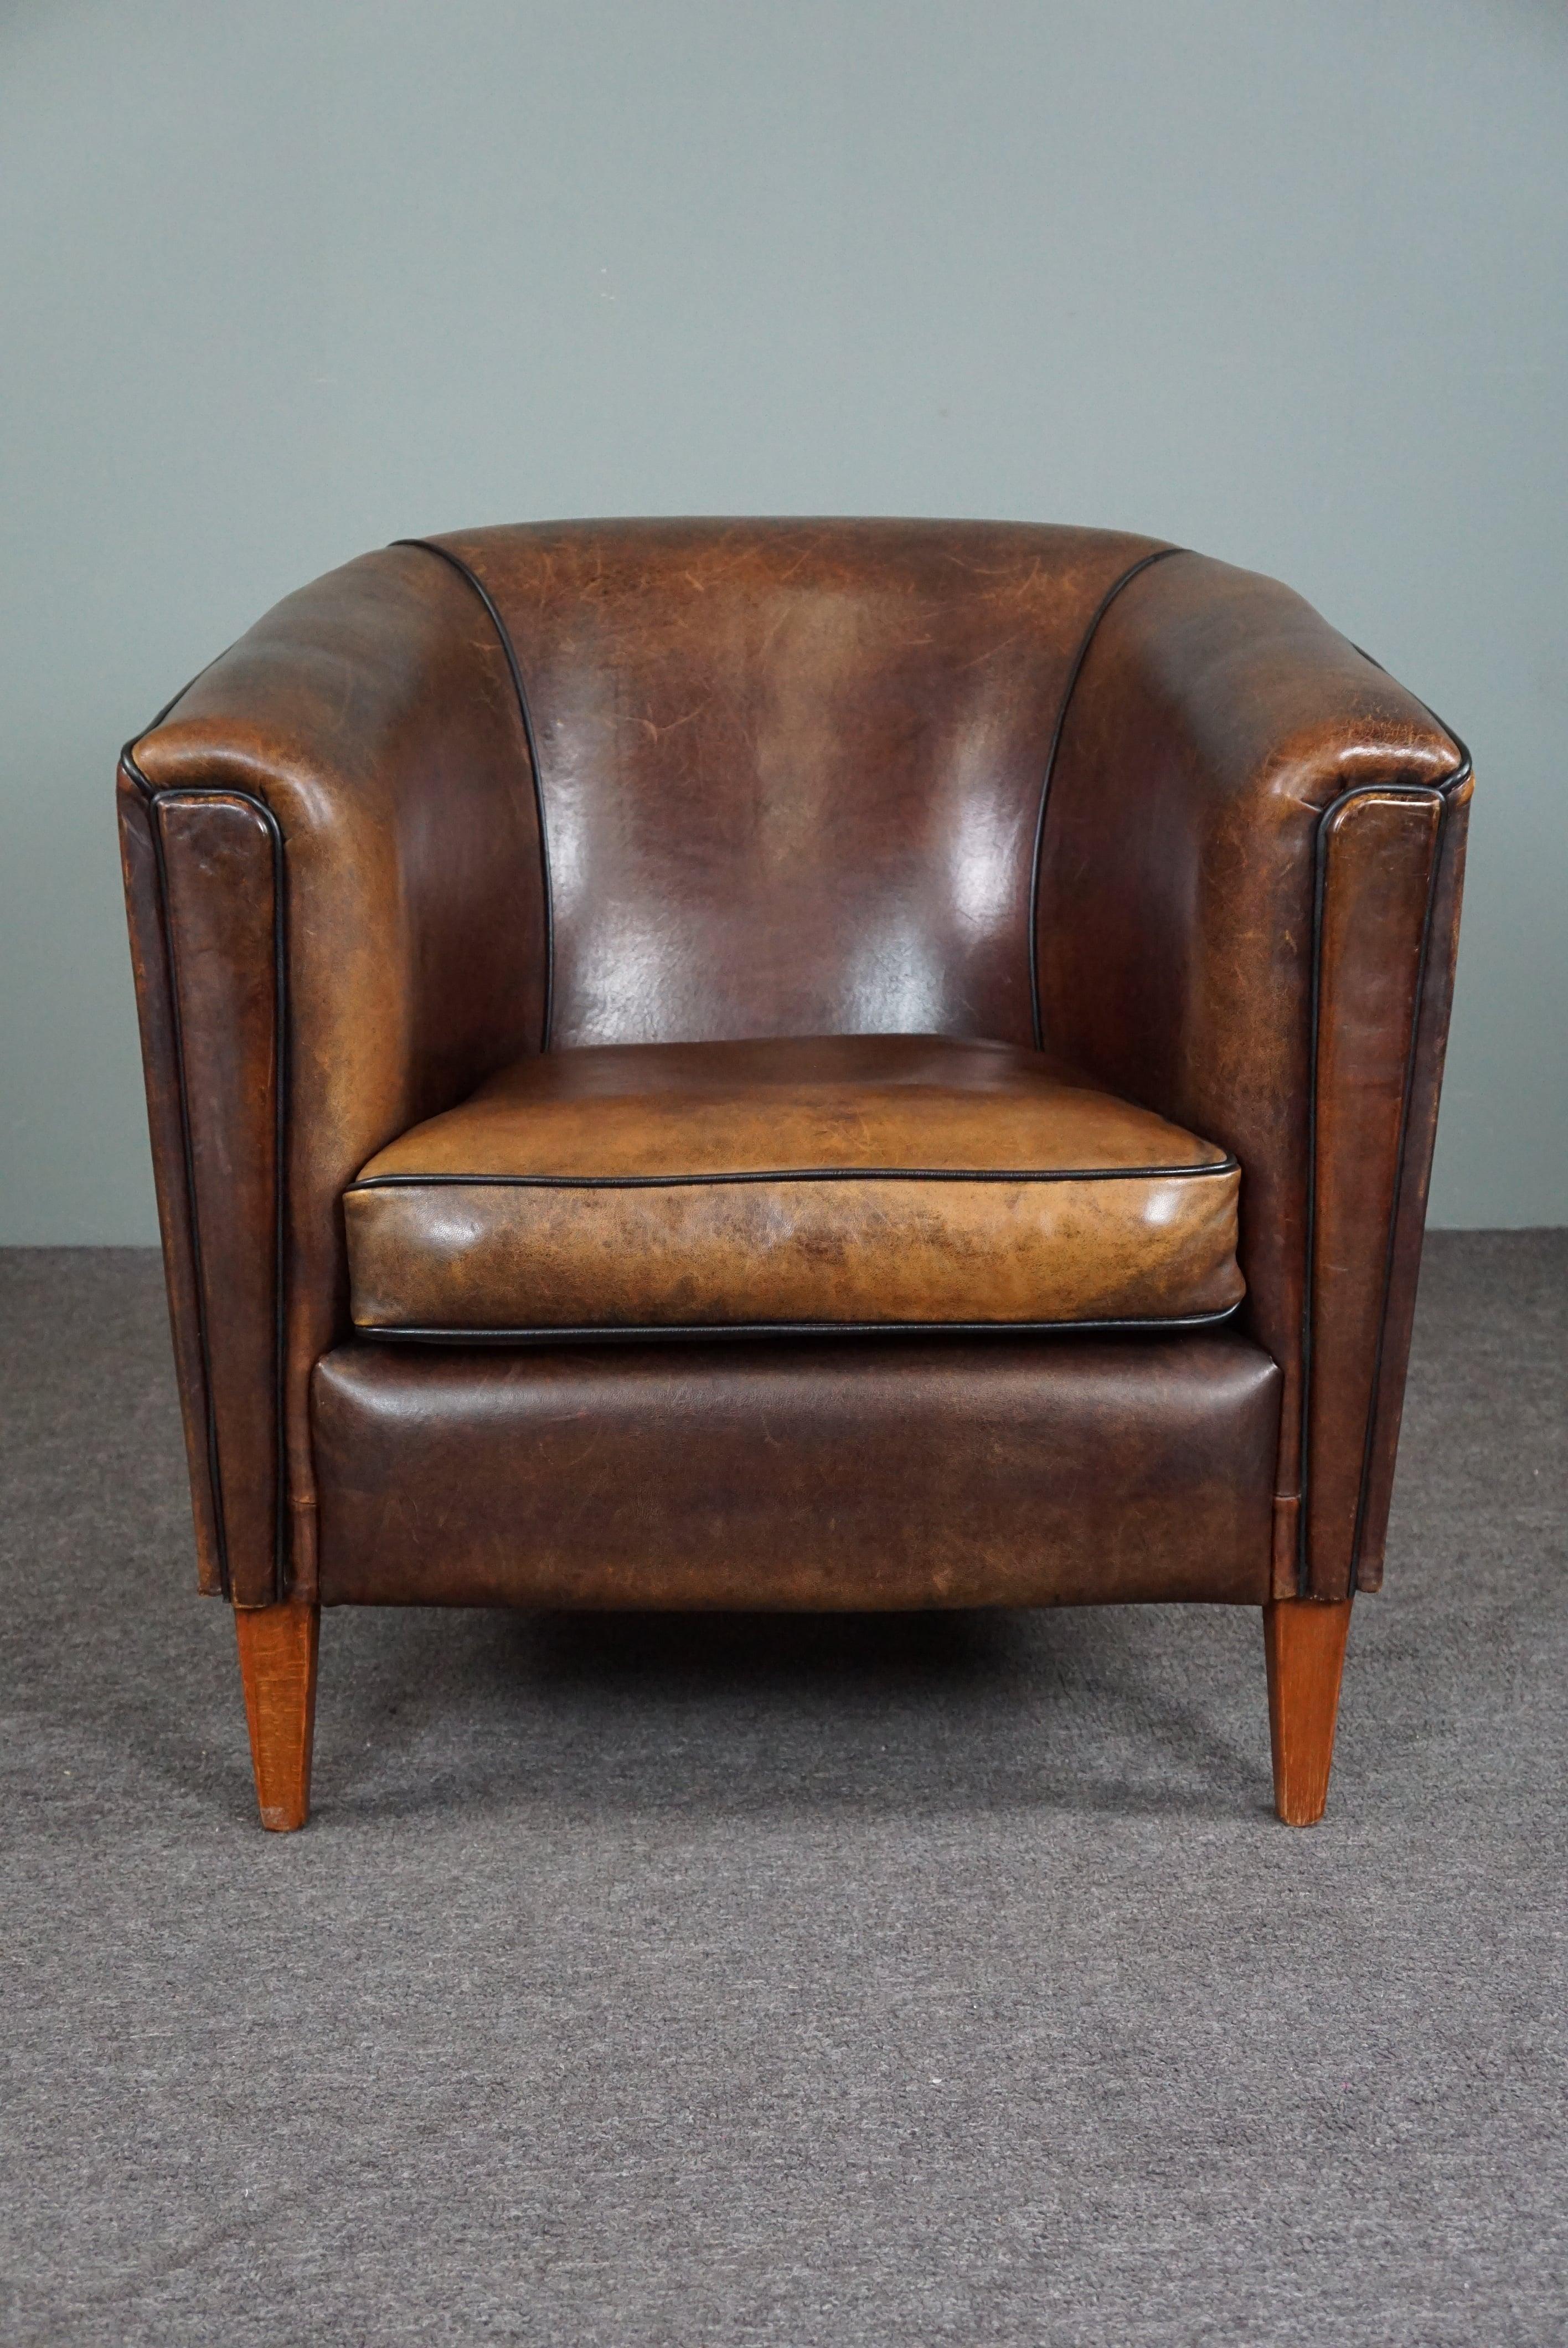 Offered is this sheep leather club chair with a highly sought-after appearance.

This well-fitting sheep leather club chair is in good condition and is particularly popular and appreciated among enthusiasts. The color gradient of the sheep leather